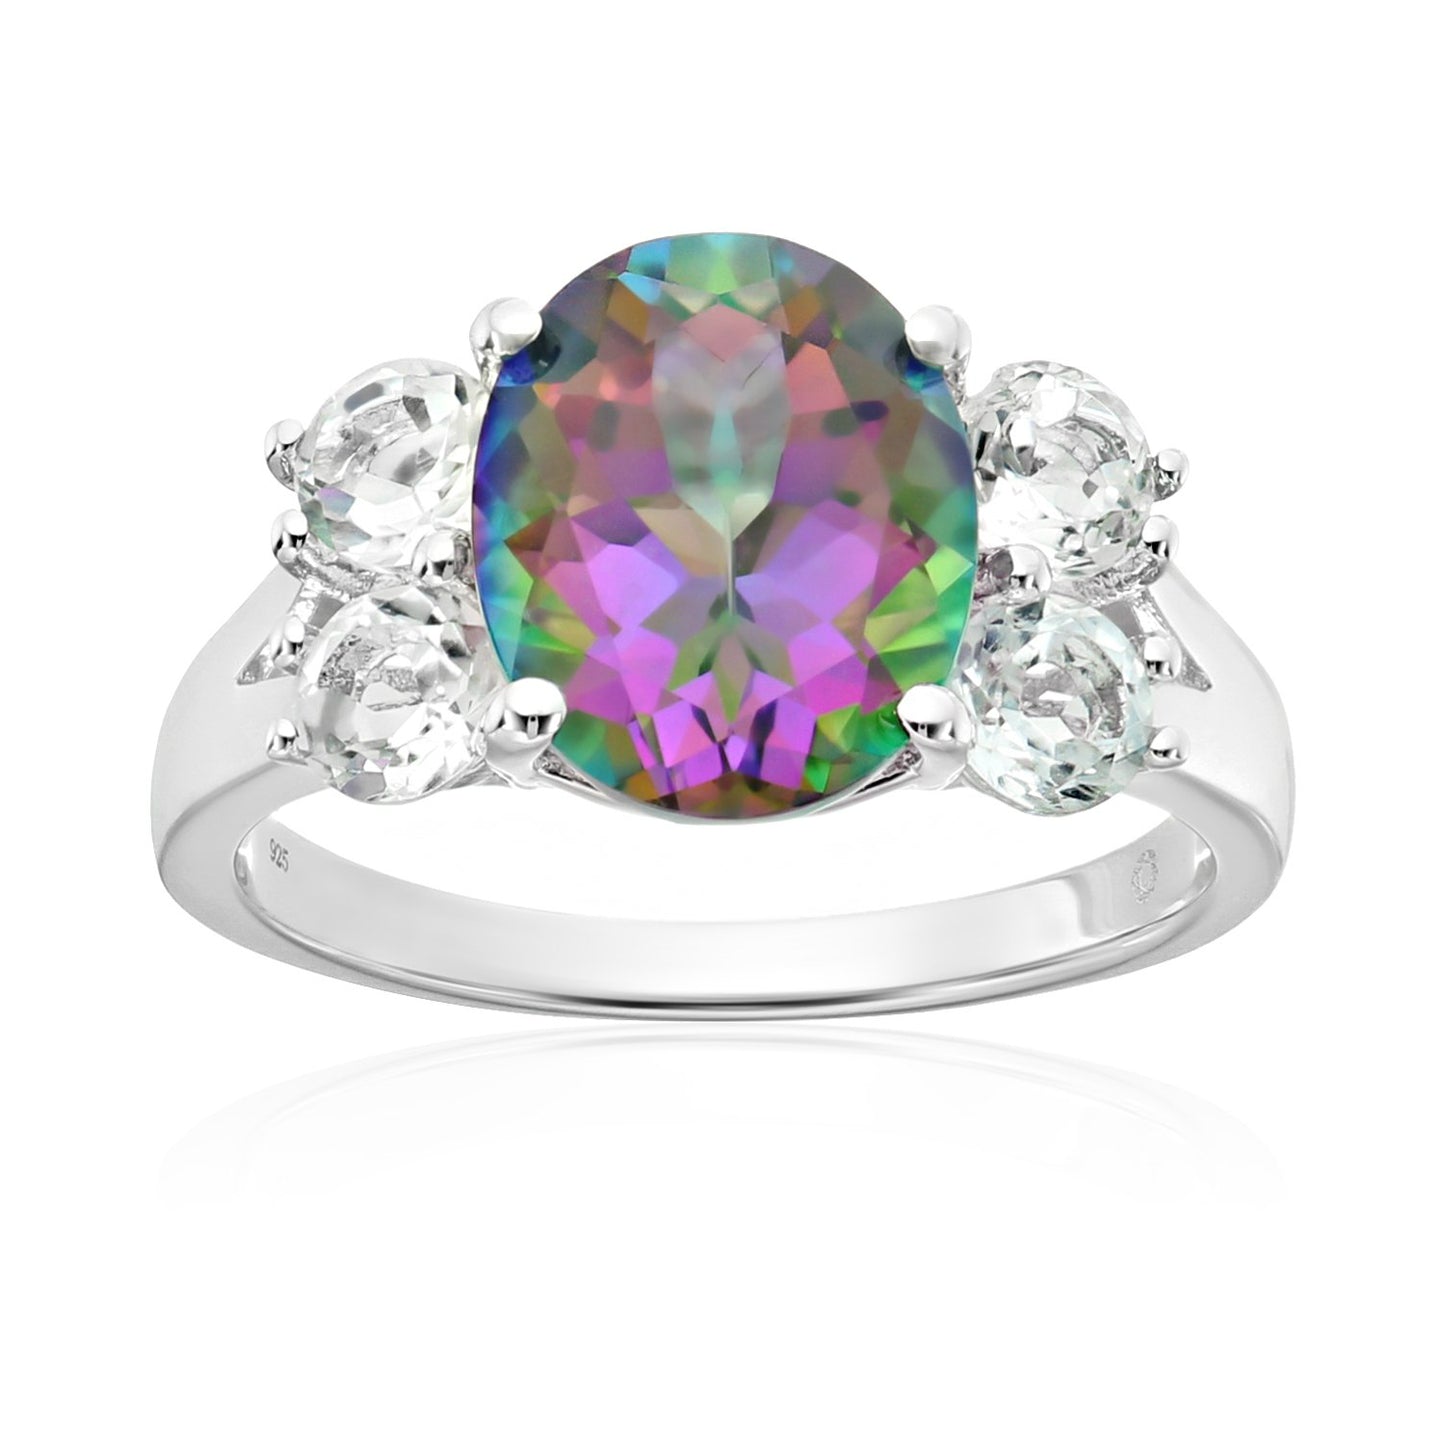 Pinctore Sterling Silver Mystic Topaz Solitaire Engagement Ring - pinctore